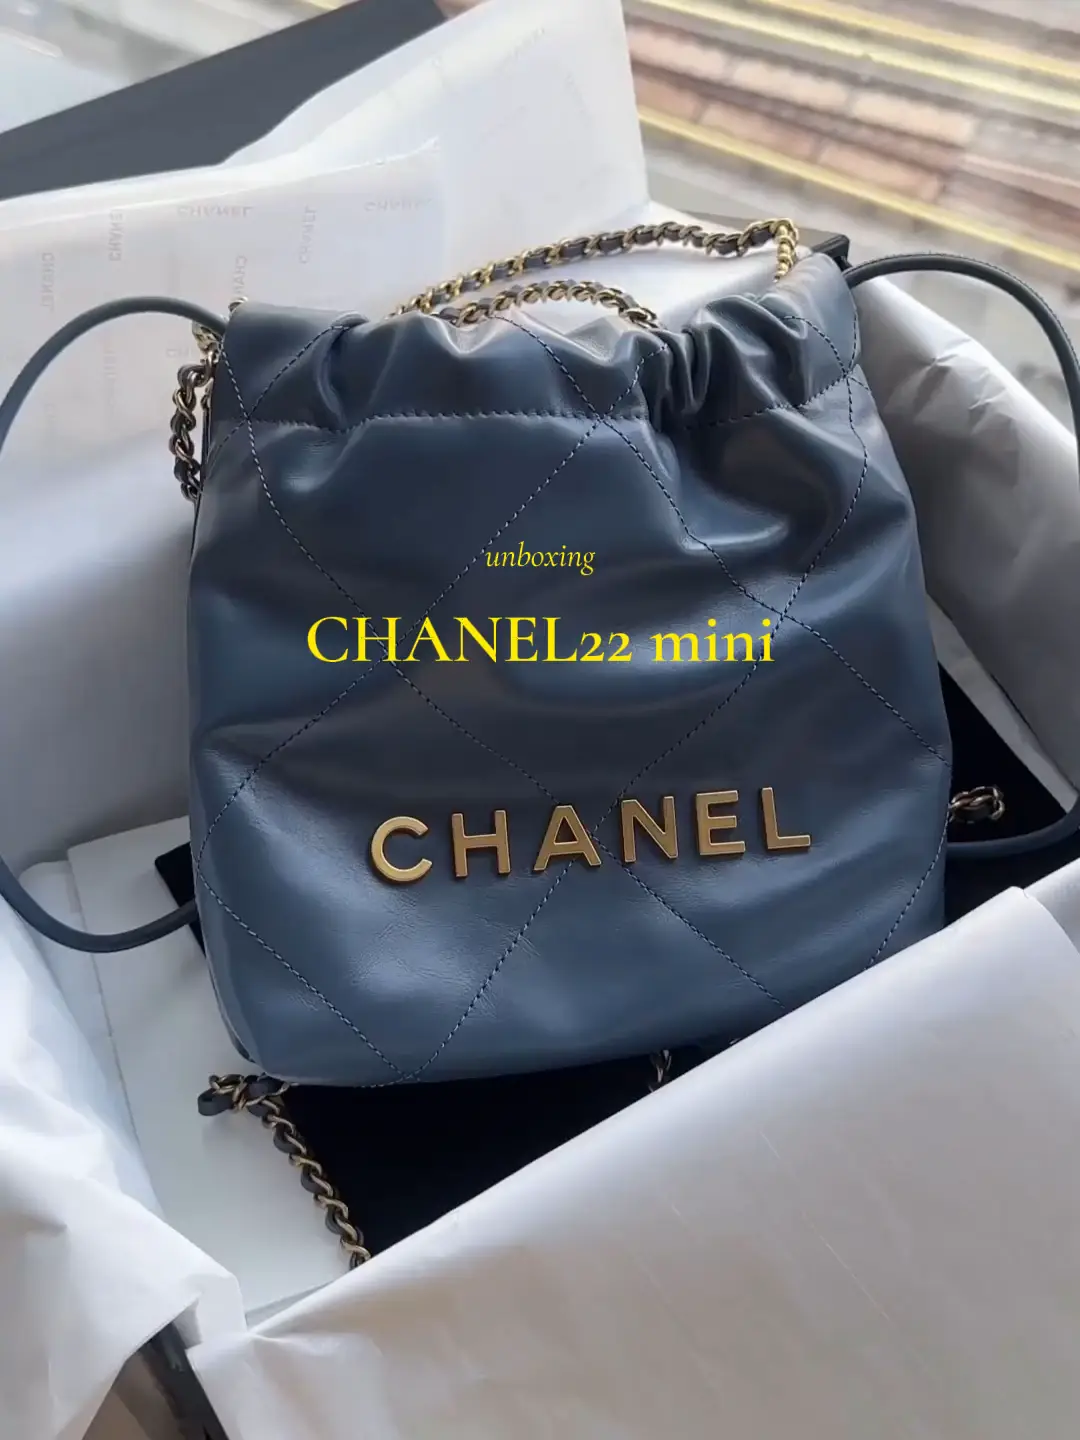 Meet the new Chanel 22 Mini 💗🫶🏼 #chanel #chanelbag #chanelunboxing